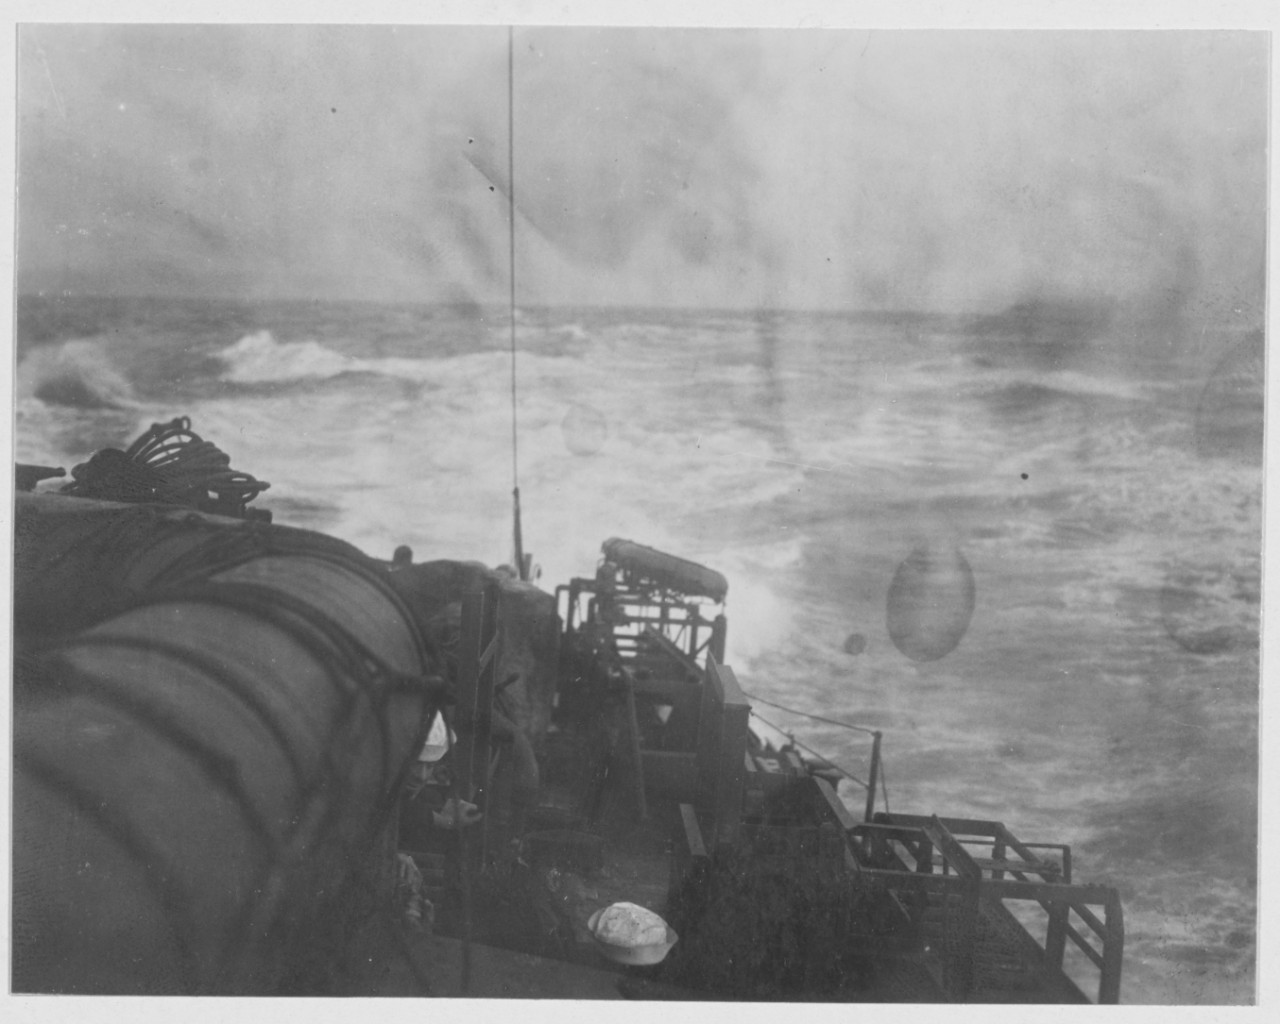 Stern of a Destroyer showing wake